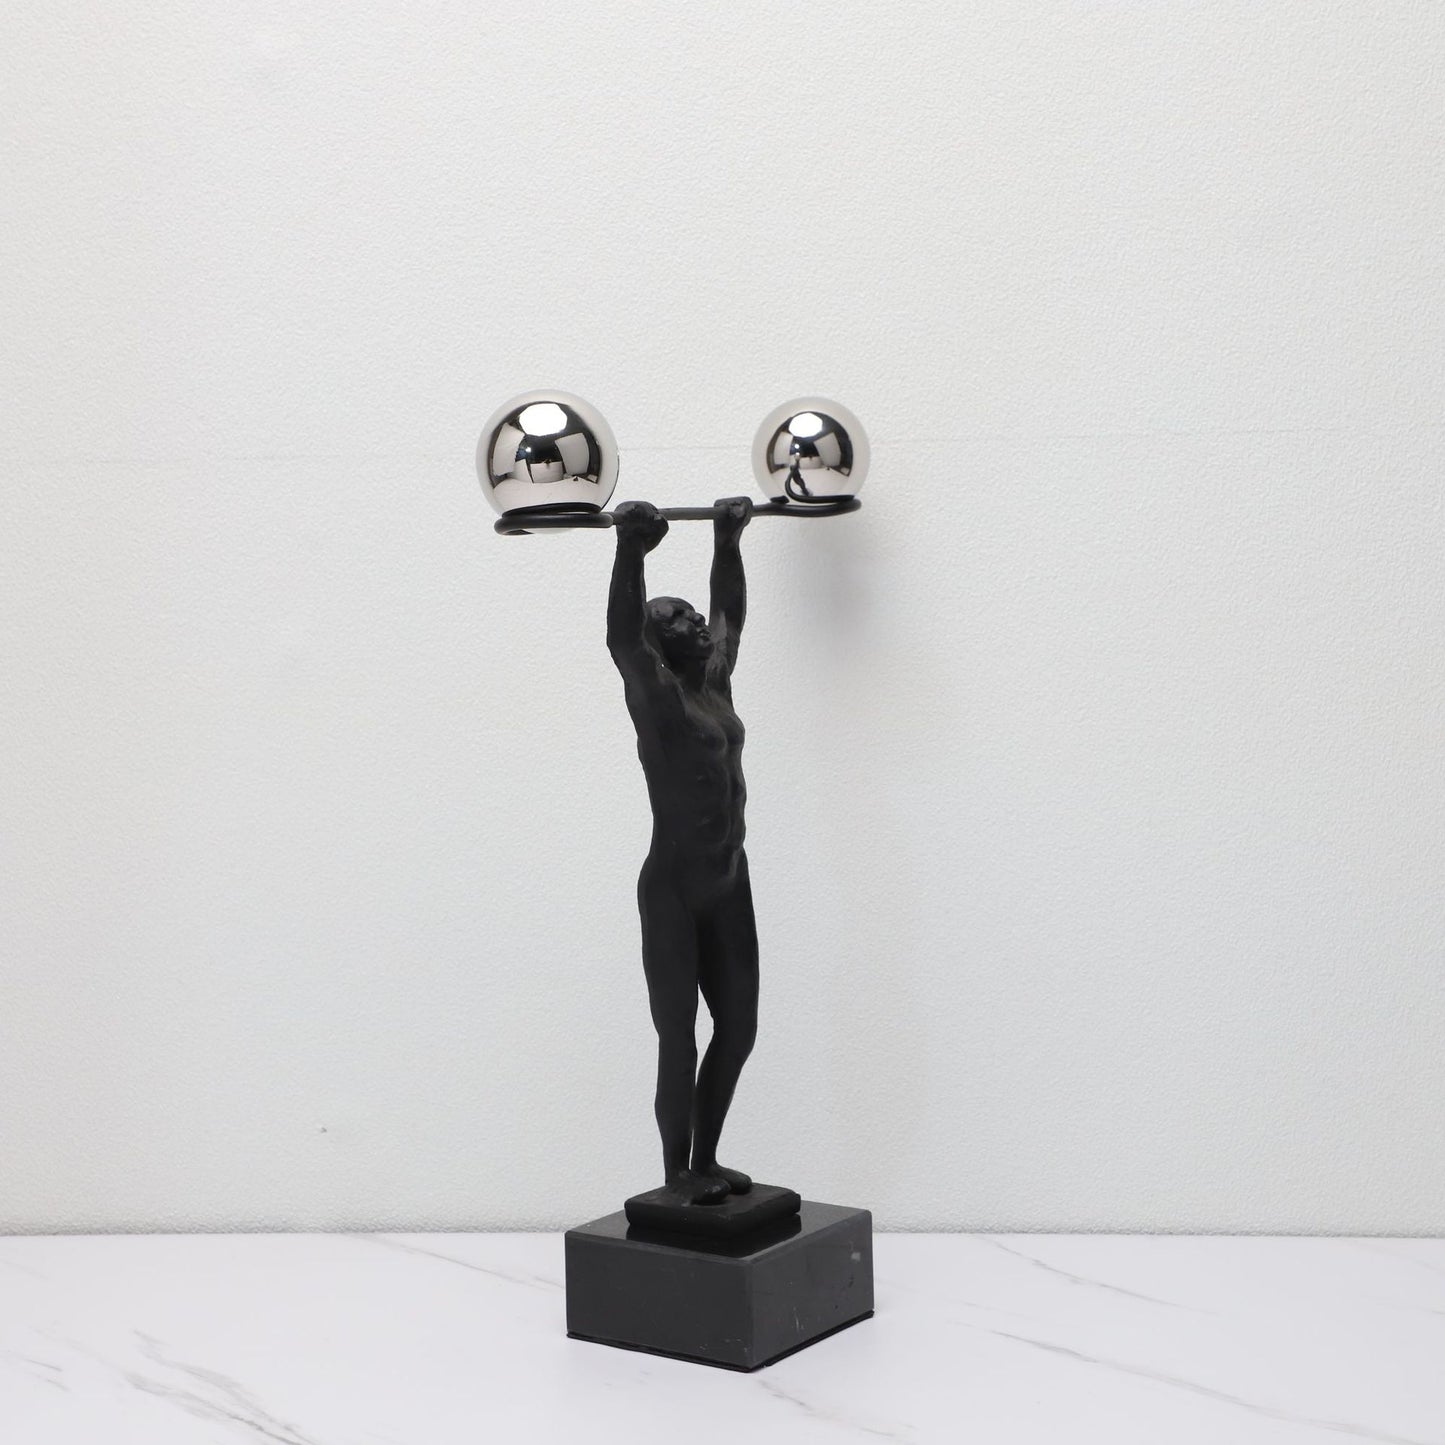 Contemporary Metal Weightlifter Decor – Ideal for Wall Cabinets